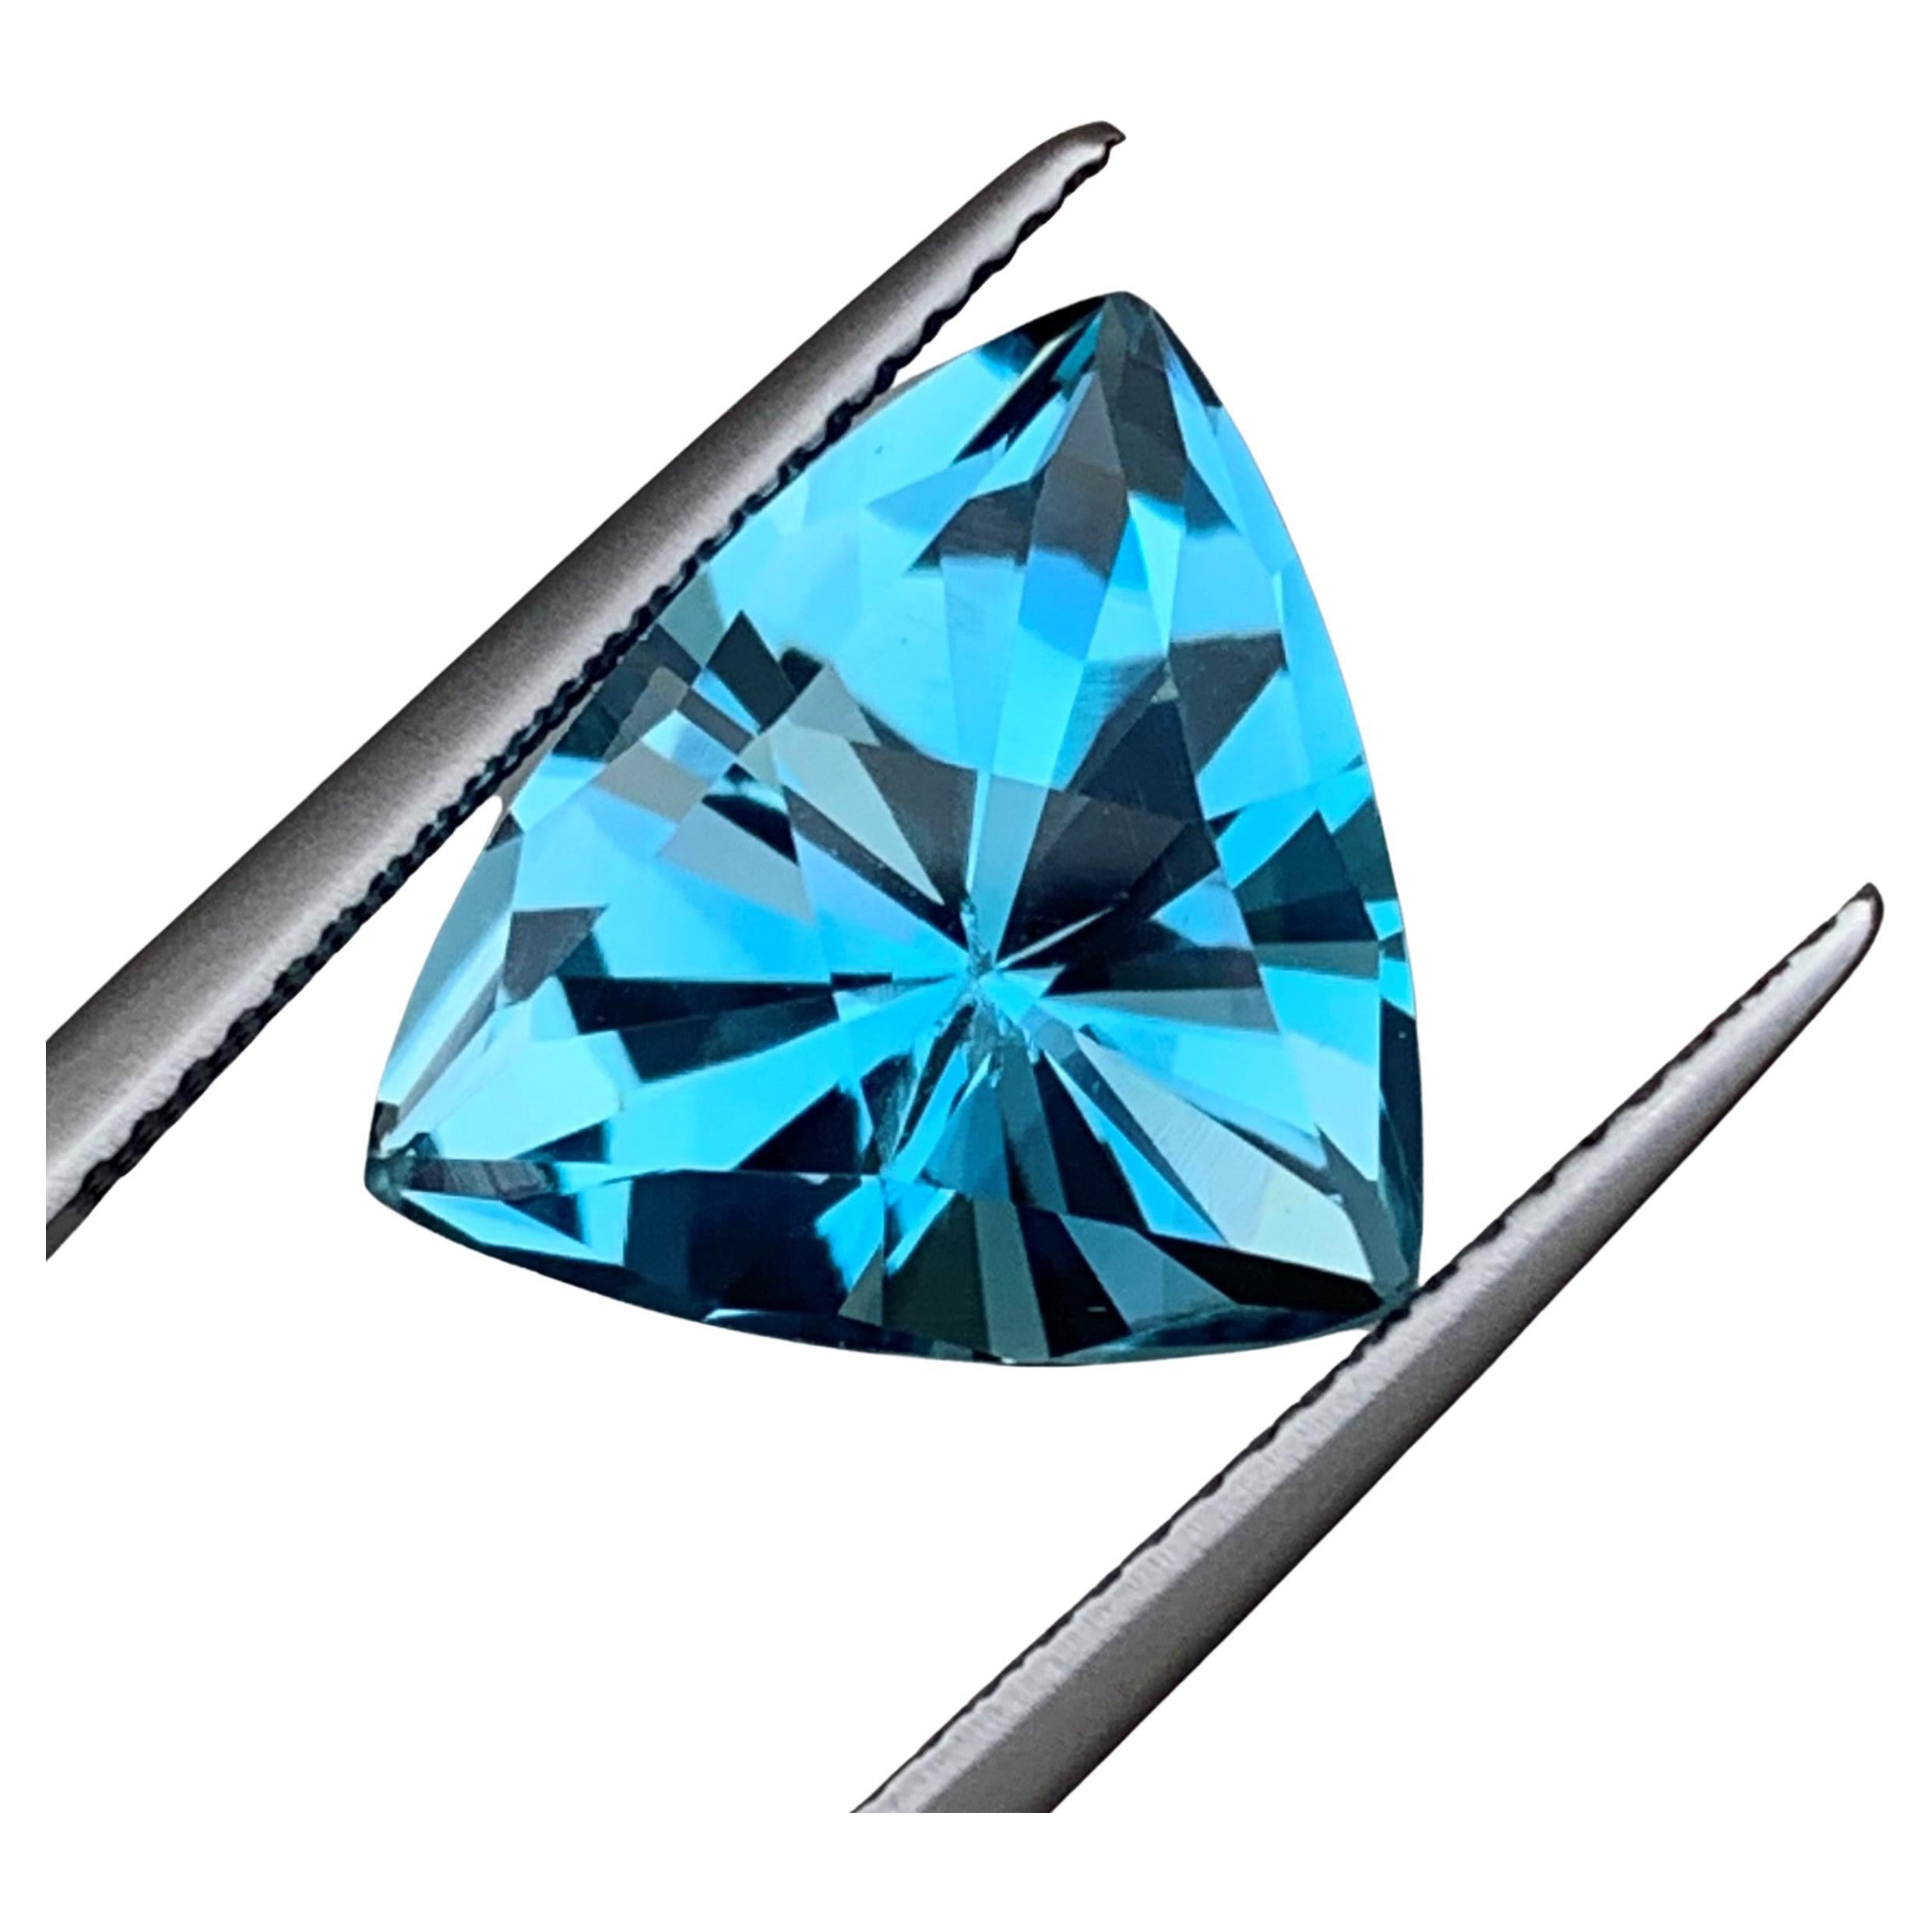 Genuine 9.0 Carat Trillion Cut Loose Blue Topaz from Brazil Available for Sell For Sale